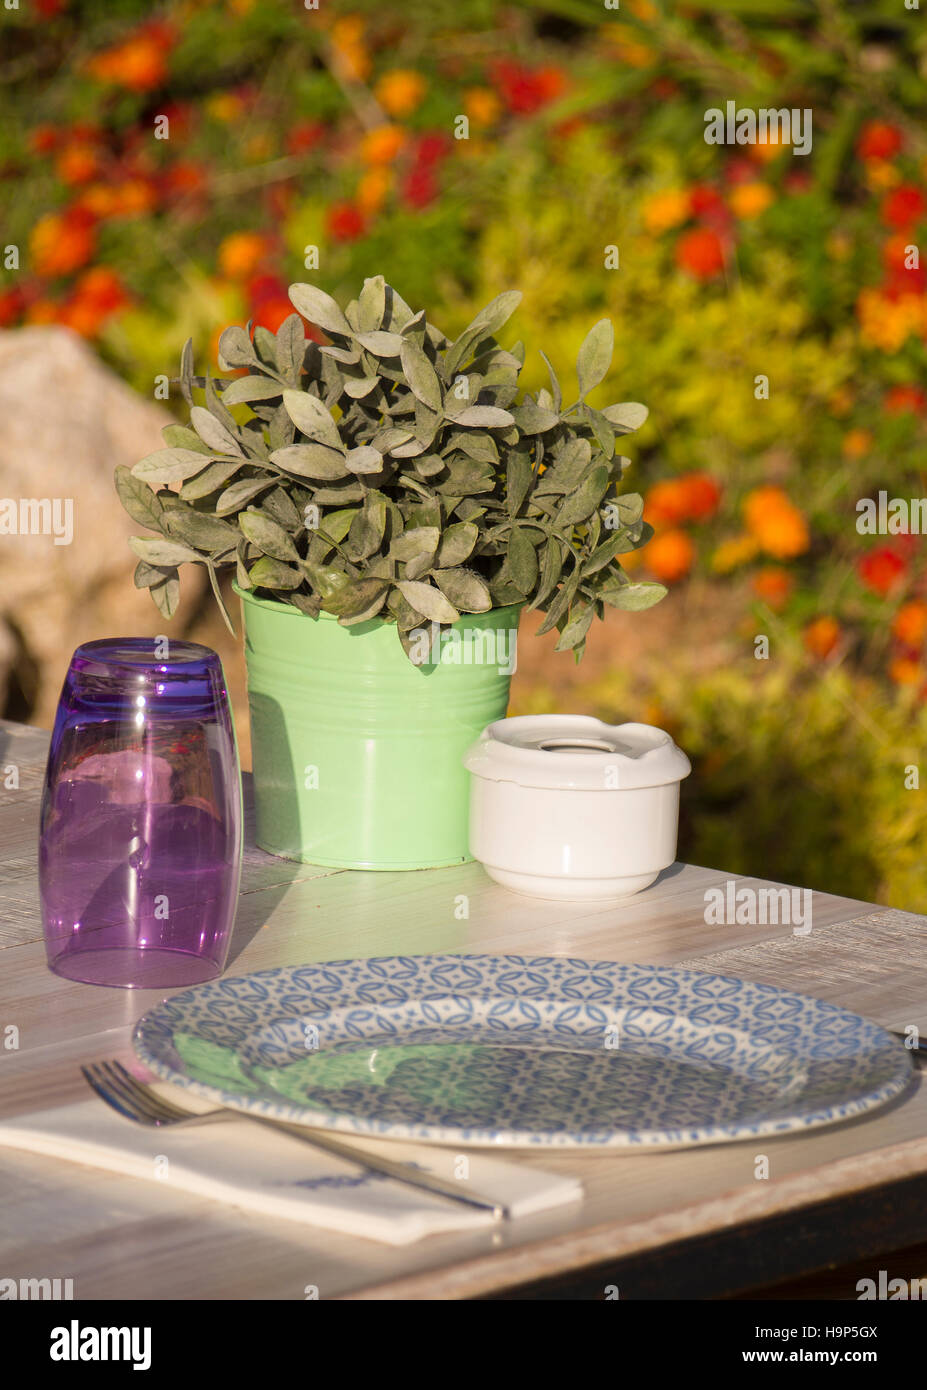 Detail of a decorated table in a sunny garden Stock Photo